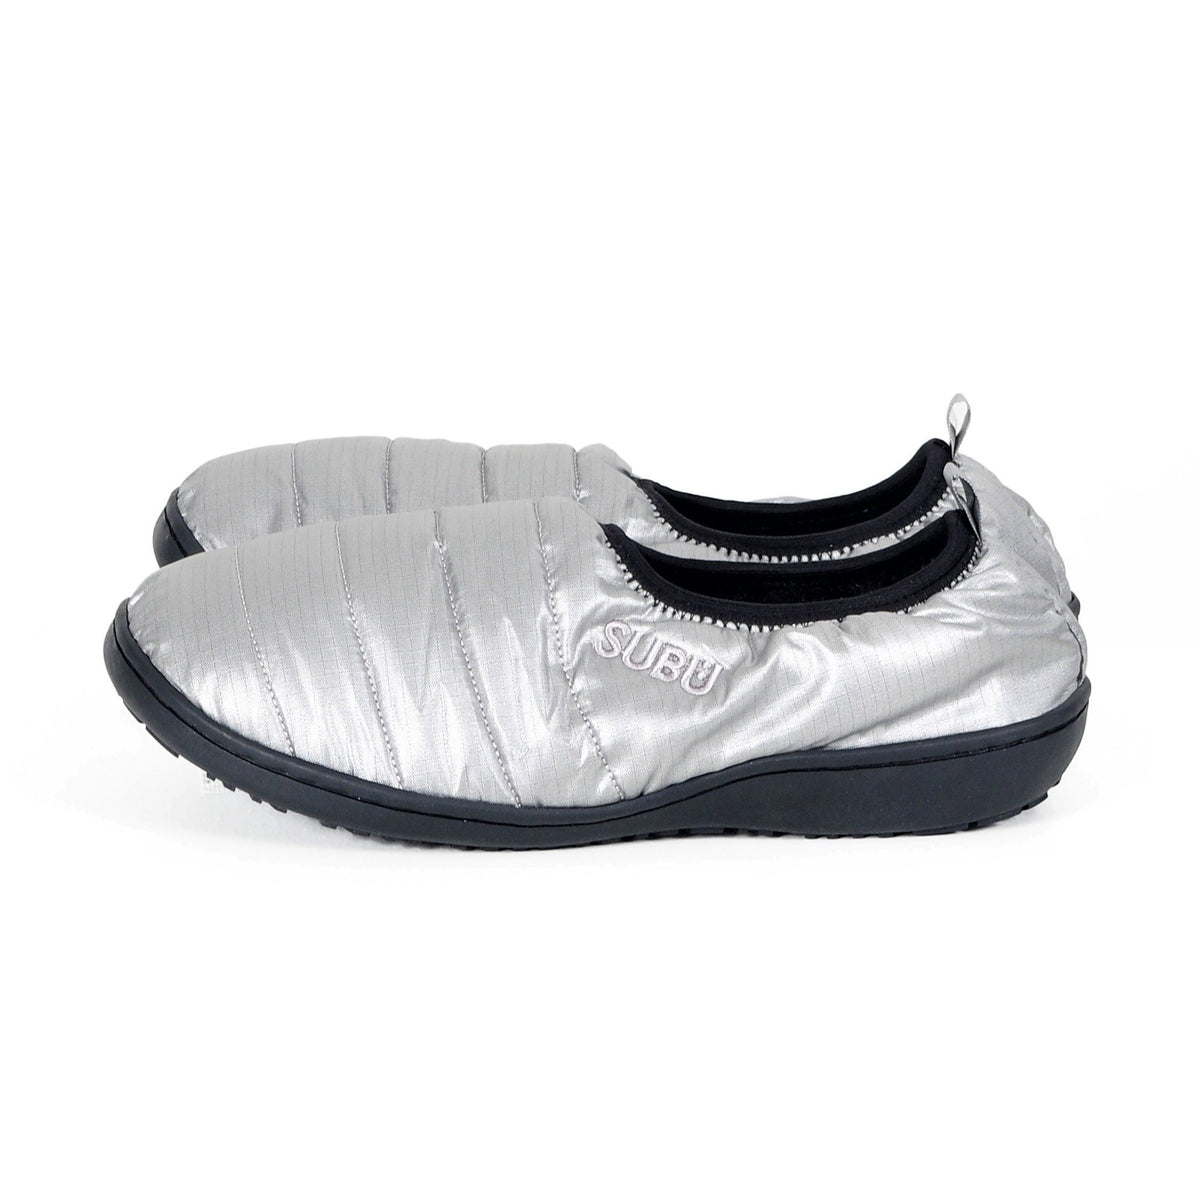 SUBU, Packable Slippers Foil Silver, 3, Slippers,